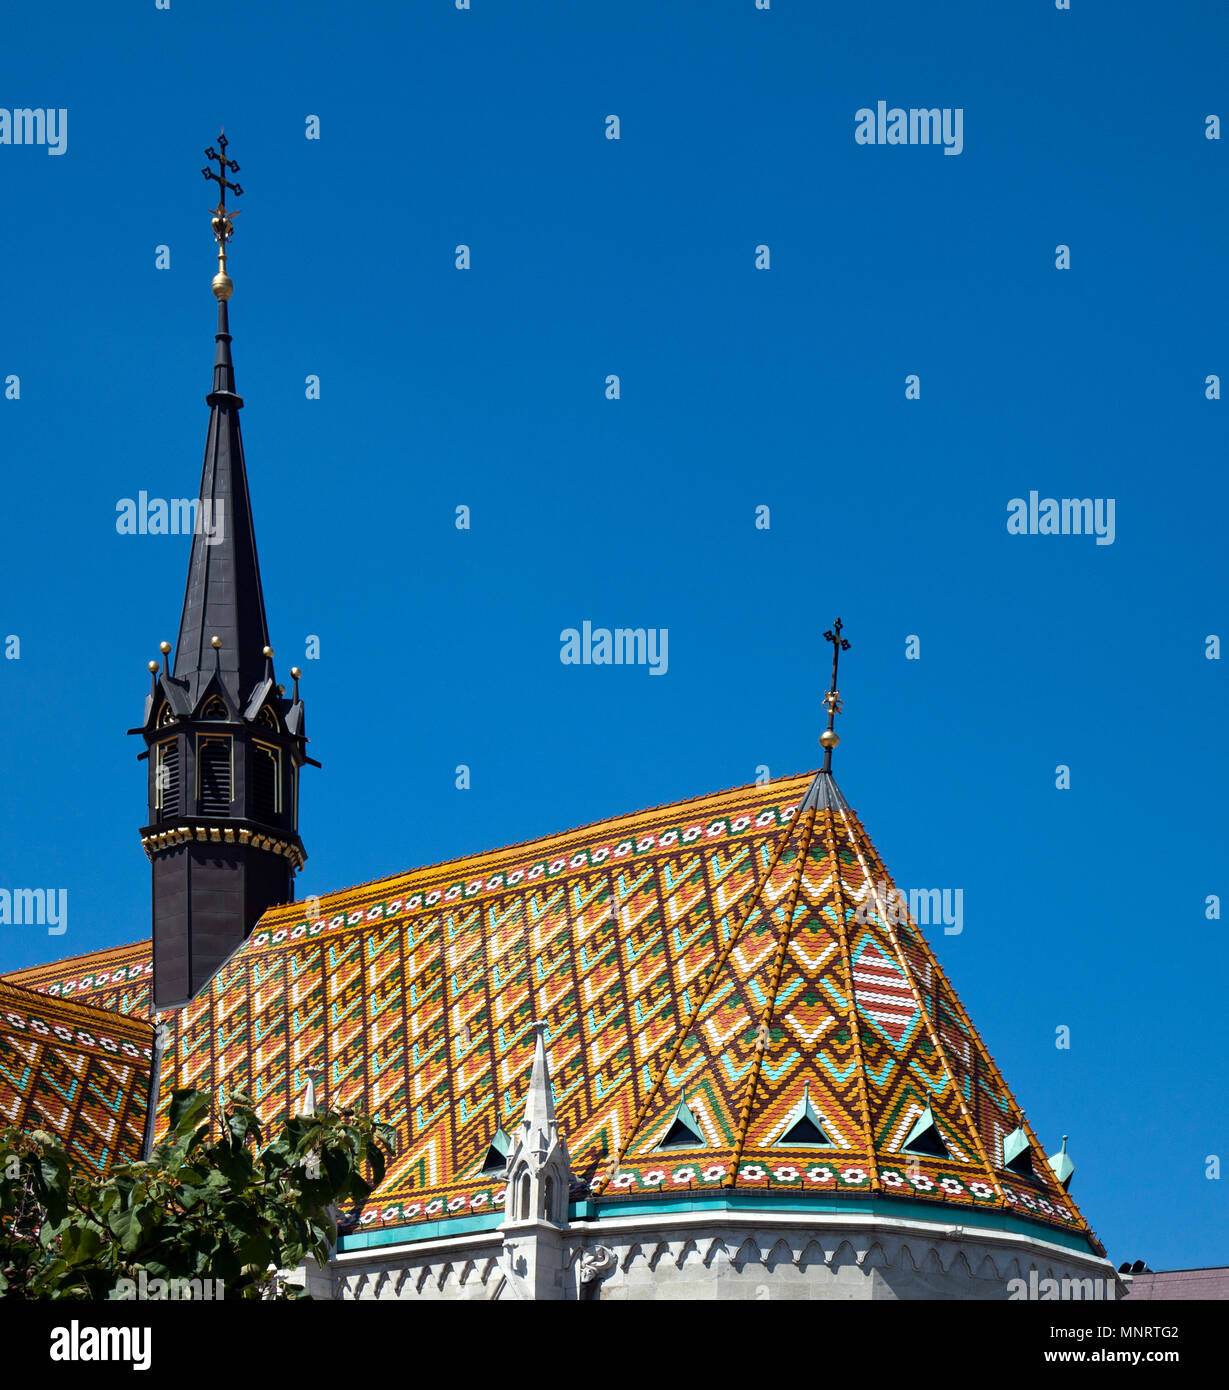 The Ornate Ceramic Tile Roof Of The Matthias Church Crowns The Fisherman S Bastion On Buda Hill Budapest Hungary Stock Photo Alamy